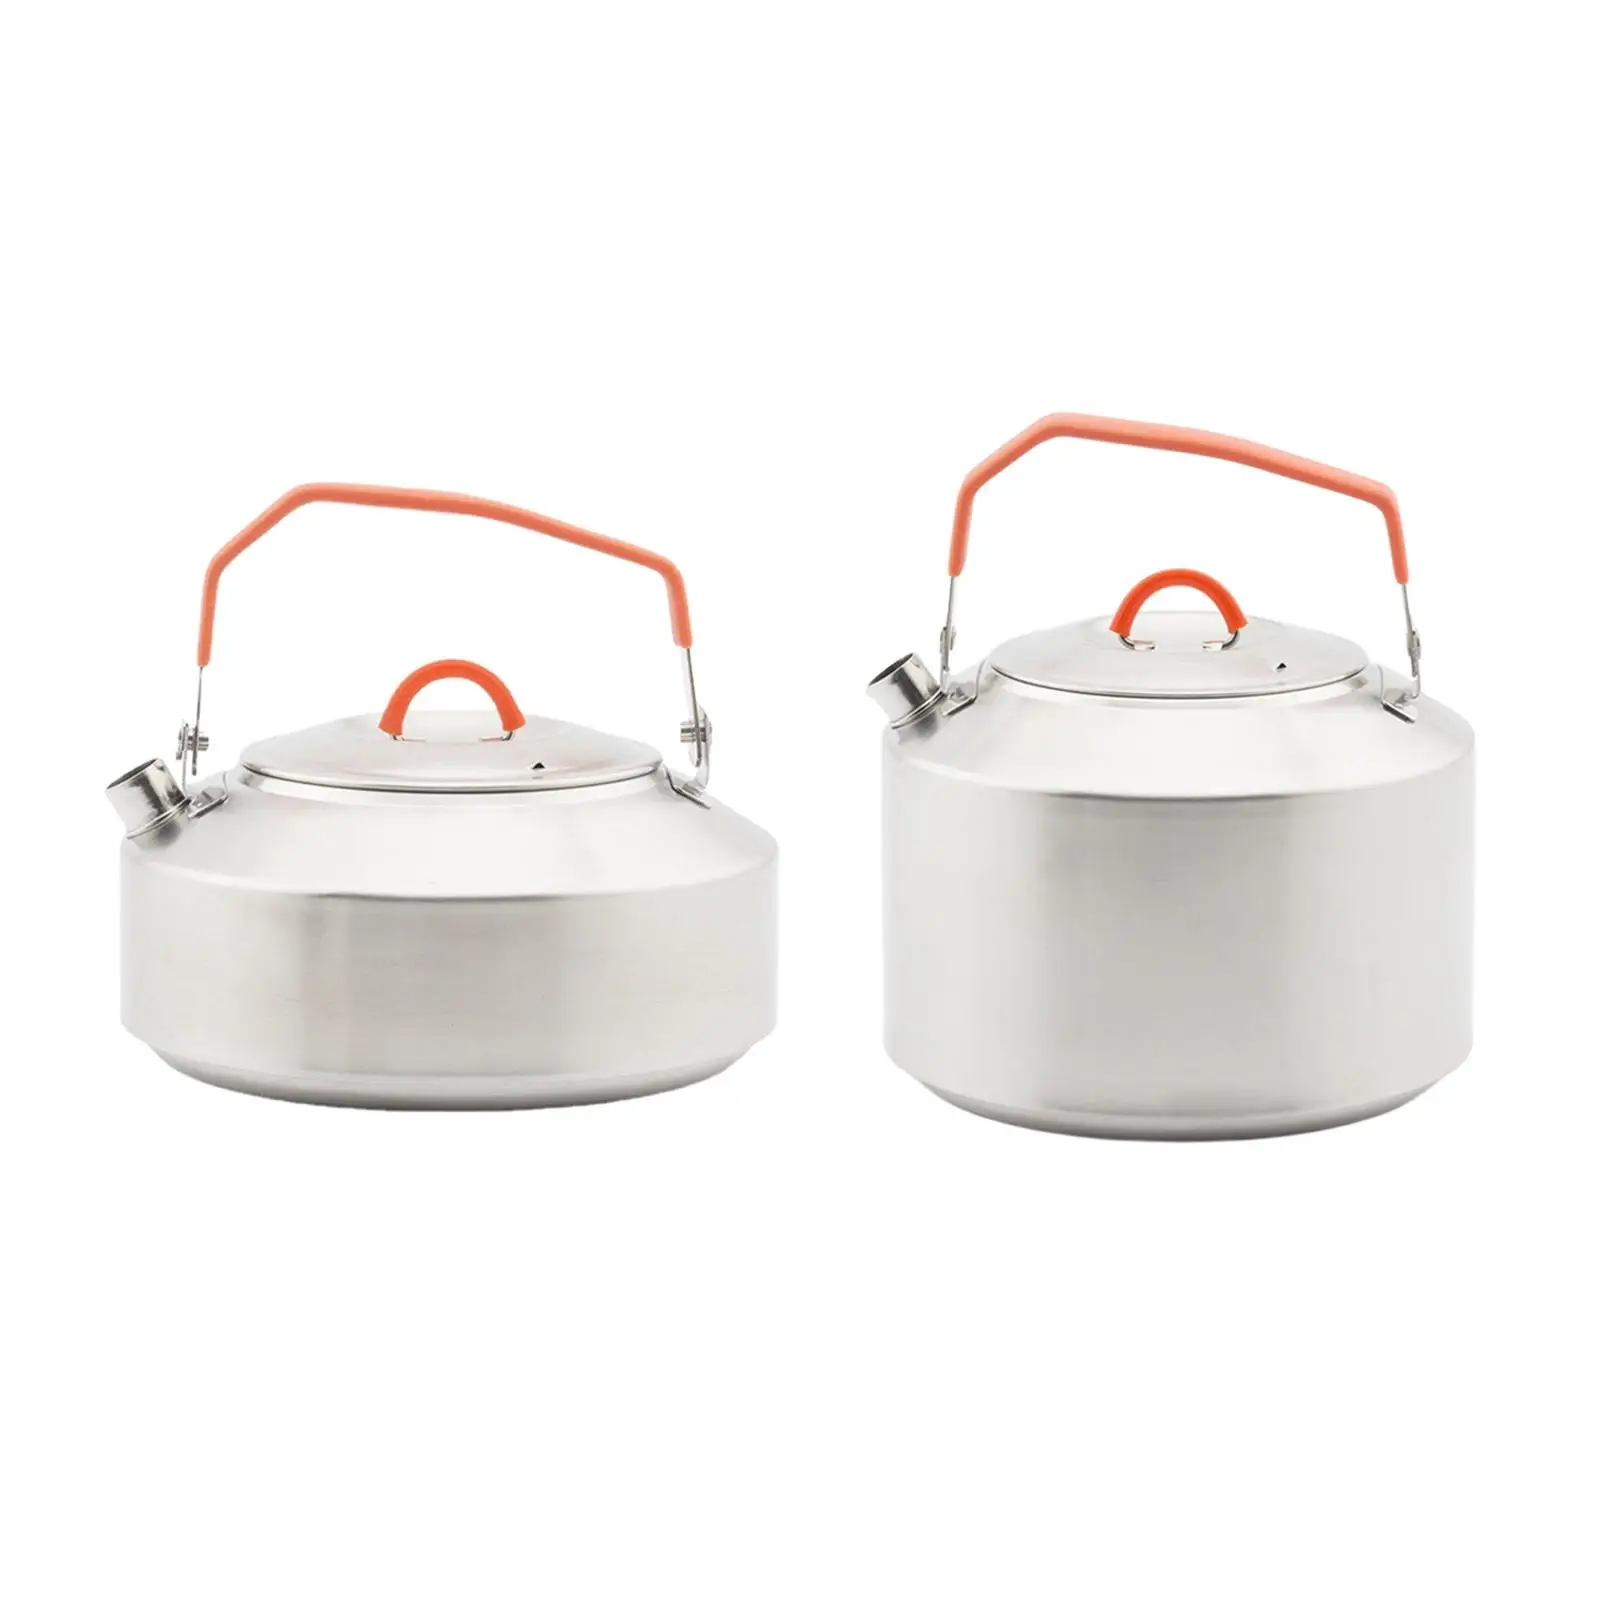 Lightweight Camping Kettle Campfire Kettle Teapot Coffee Pot for Hiking